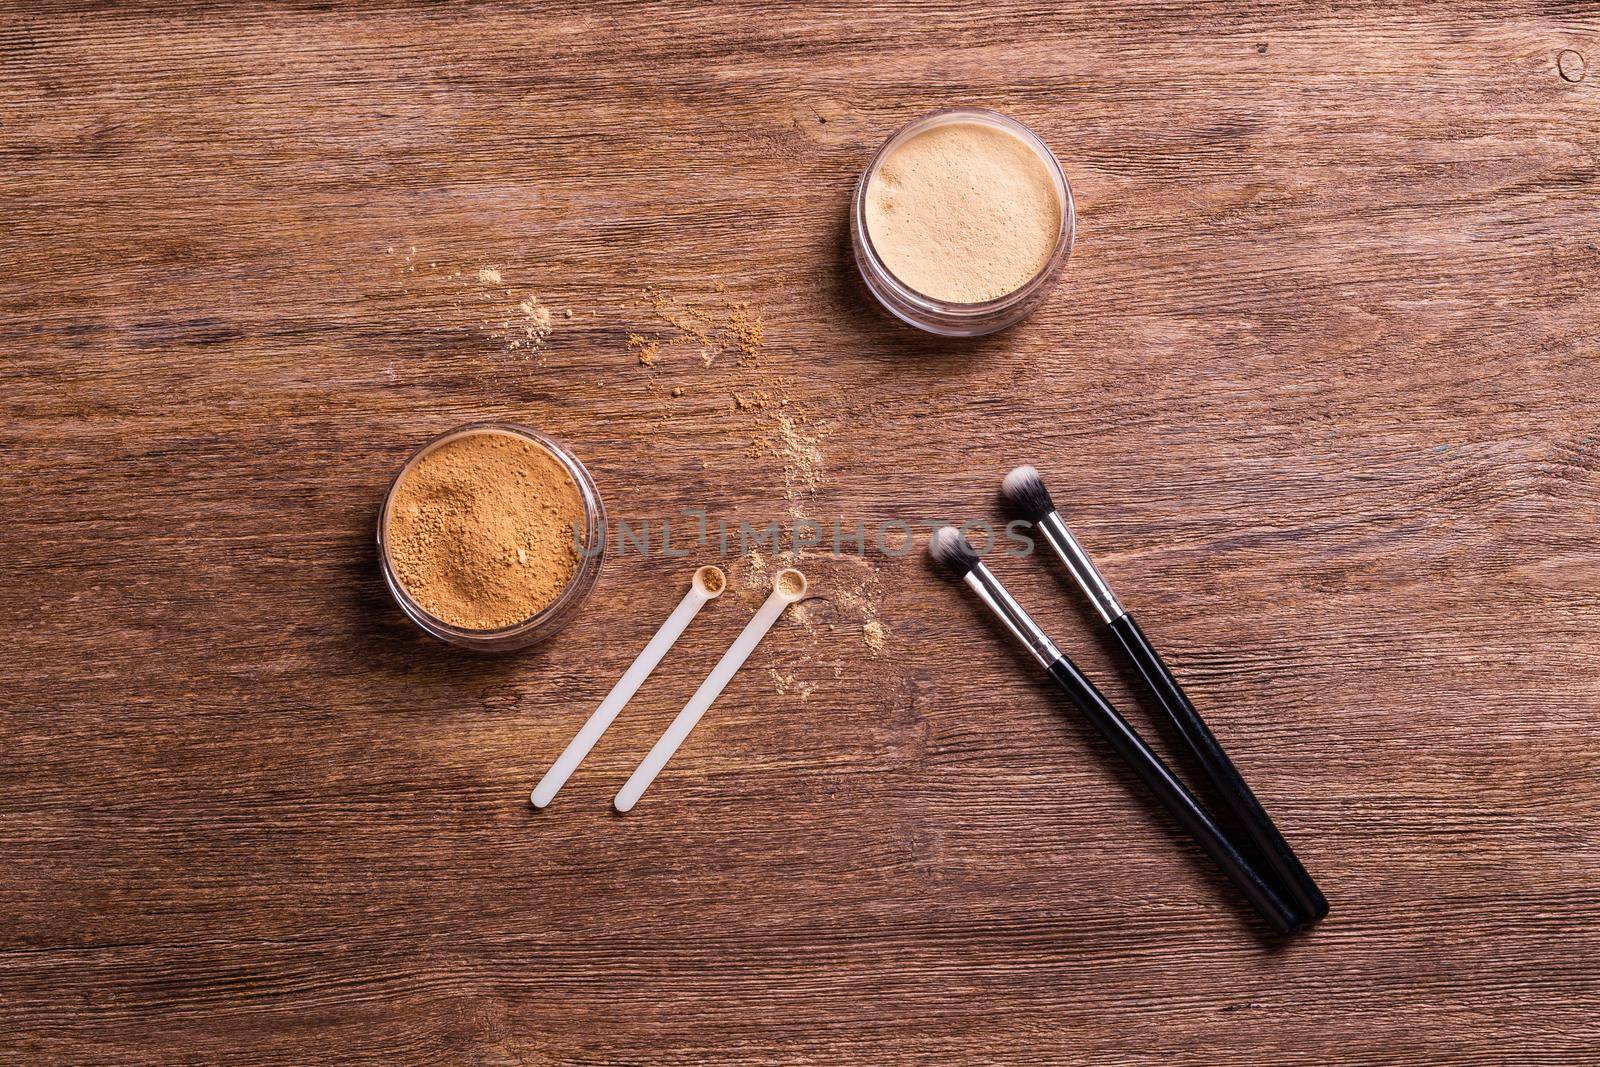 Mineral powder foundation with brushes on a wooden background. Eco-friendly and organic beauty products by Satura86